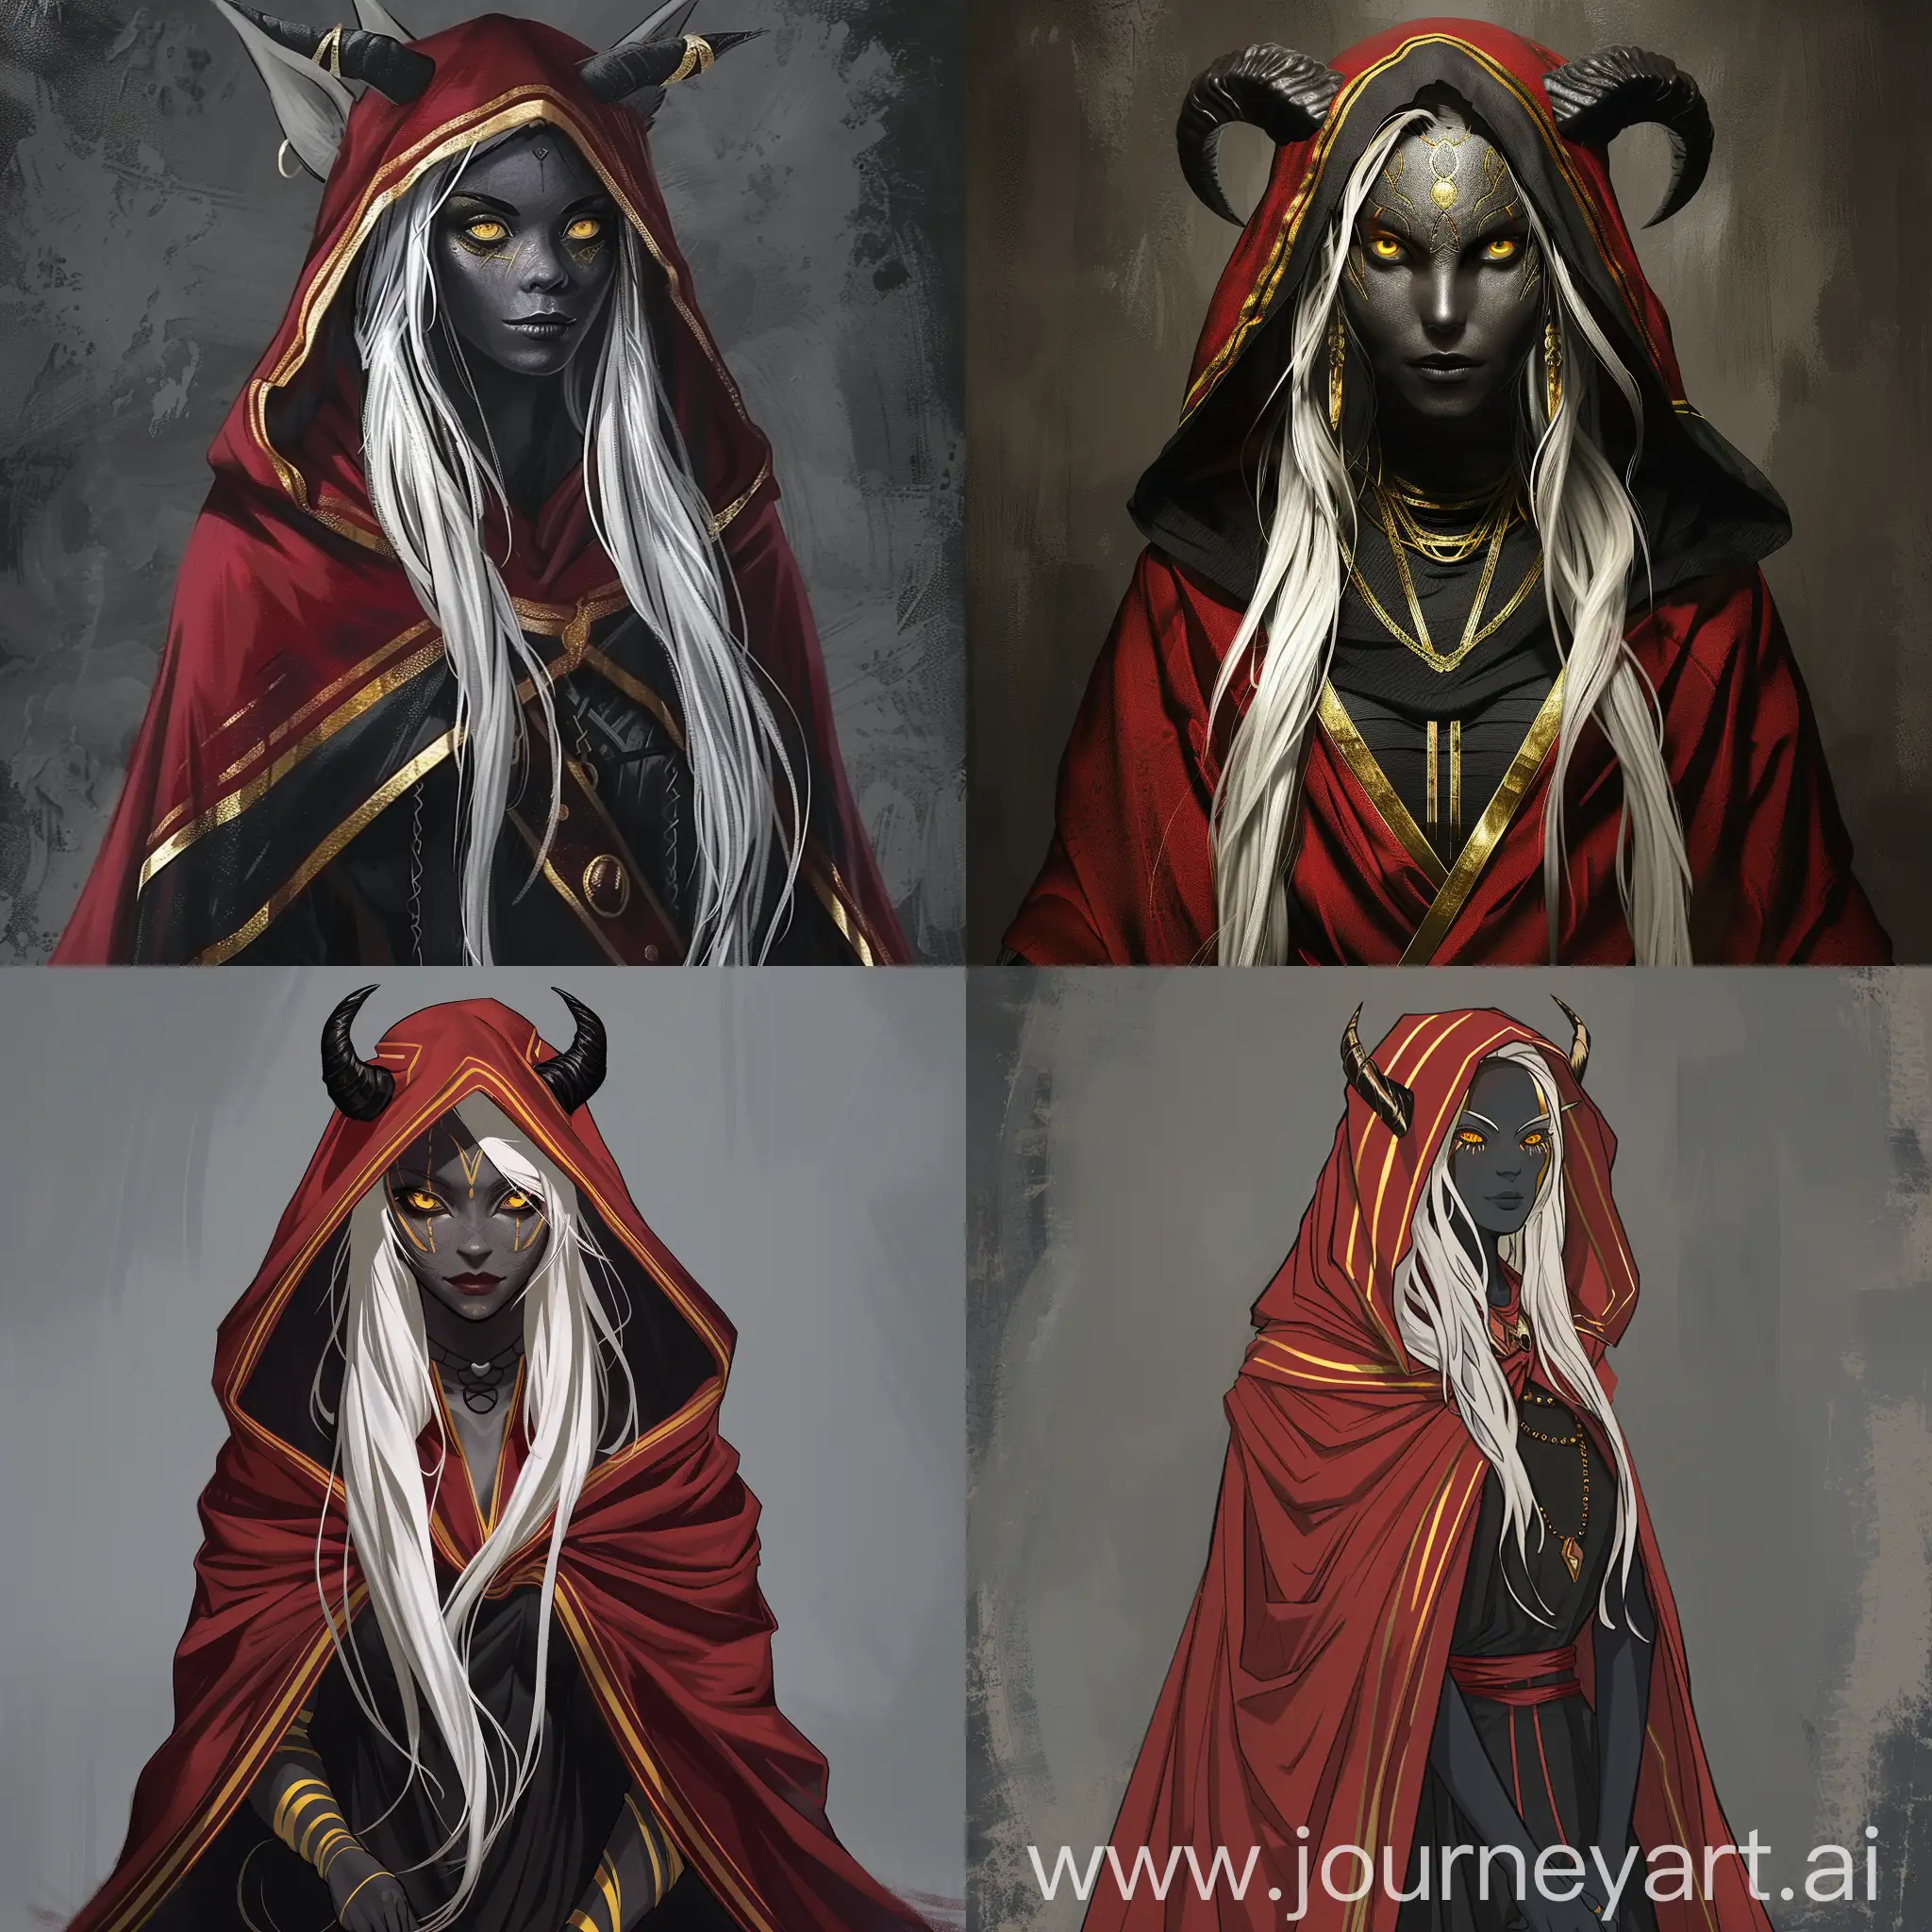 Enigmatic-BlackHorned-Woman-in-Red-Cloak-with-Golden-Accents